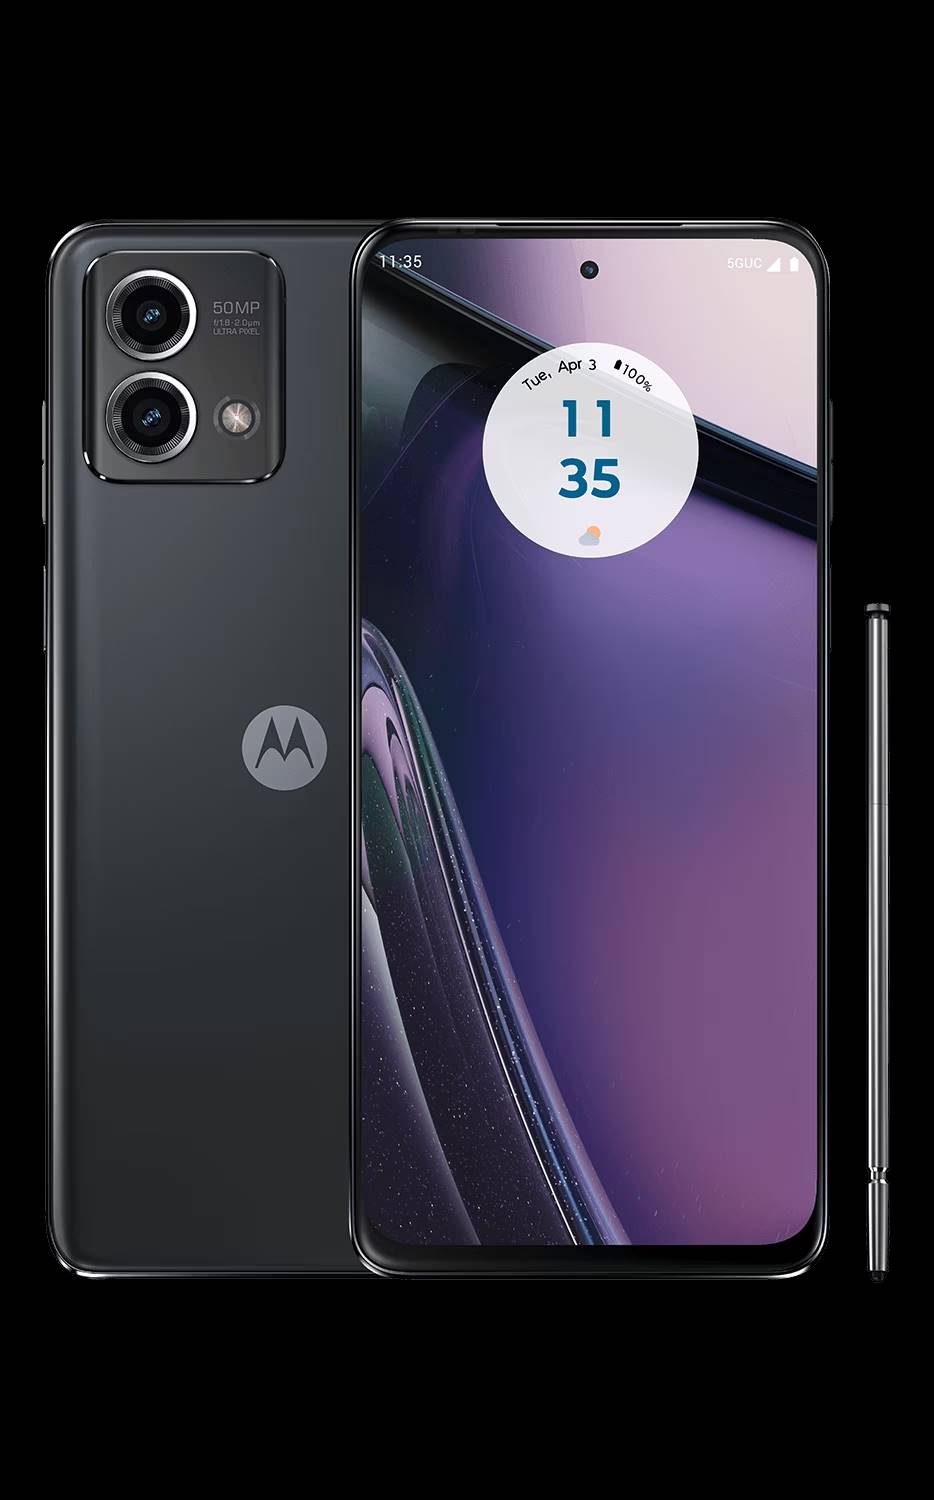 Motorola Moto G Stylus 5G (2023) Released 2023, June 02, 202g, 9.2mm thickness, Android 13, planned upgrade to Android 14, 128GB/256GB storage, microSDXC, 6.6"1080x2400 pixels, 50MP2160p, 4/6GB RAMSnapdragon 6 Gen 1, 5000mAh20W